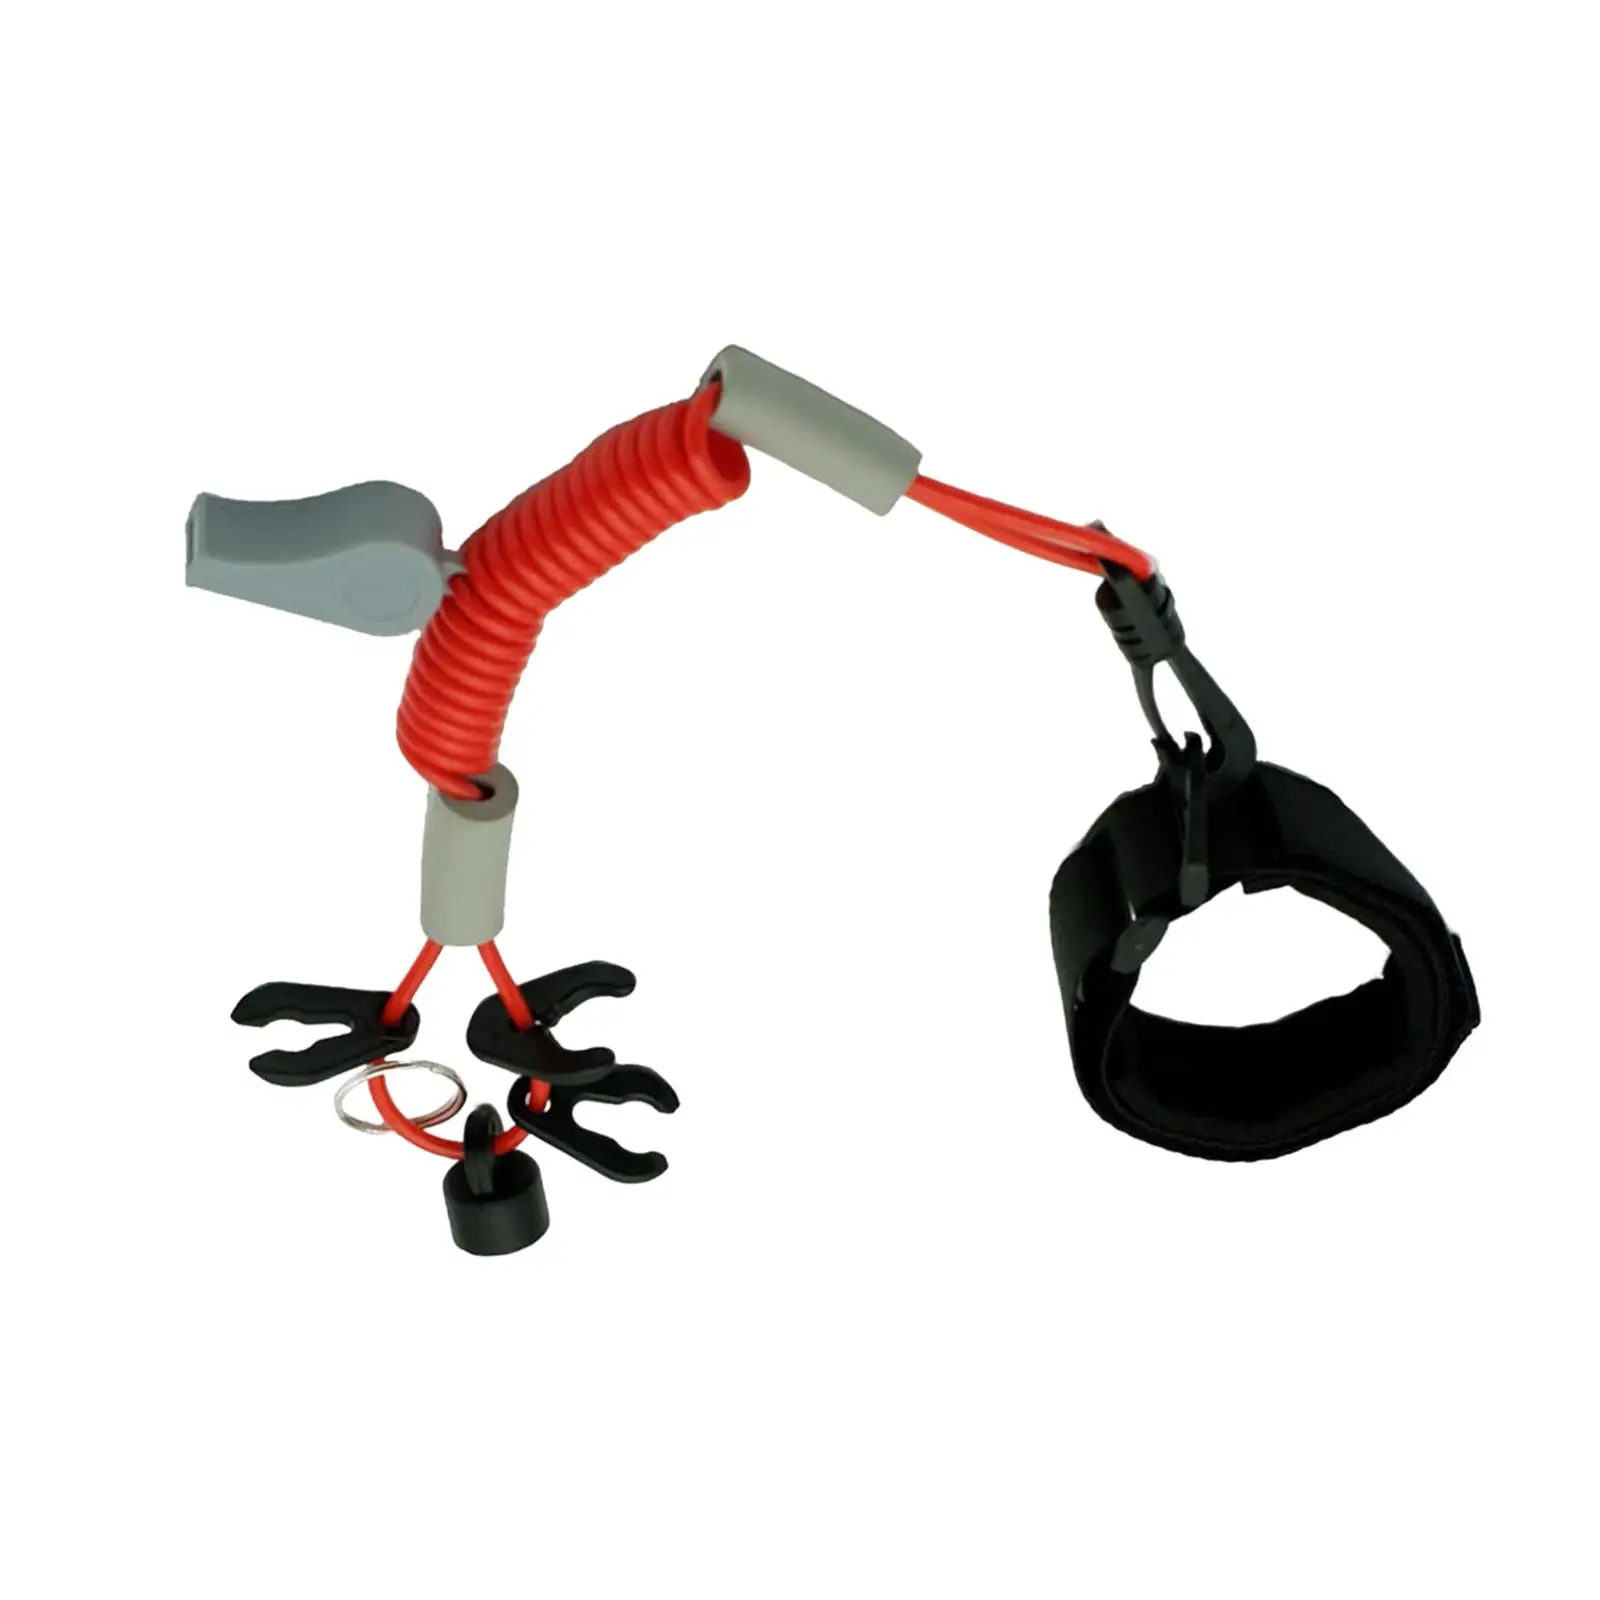 Boat Outboard Engine Start Stop Kill Safety Lanyard with Whistle Emergency Flameout Rope